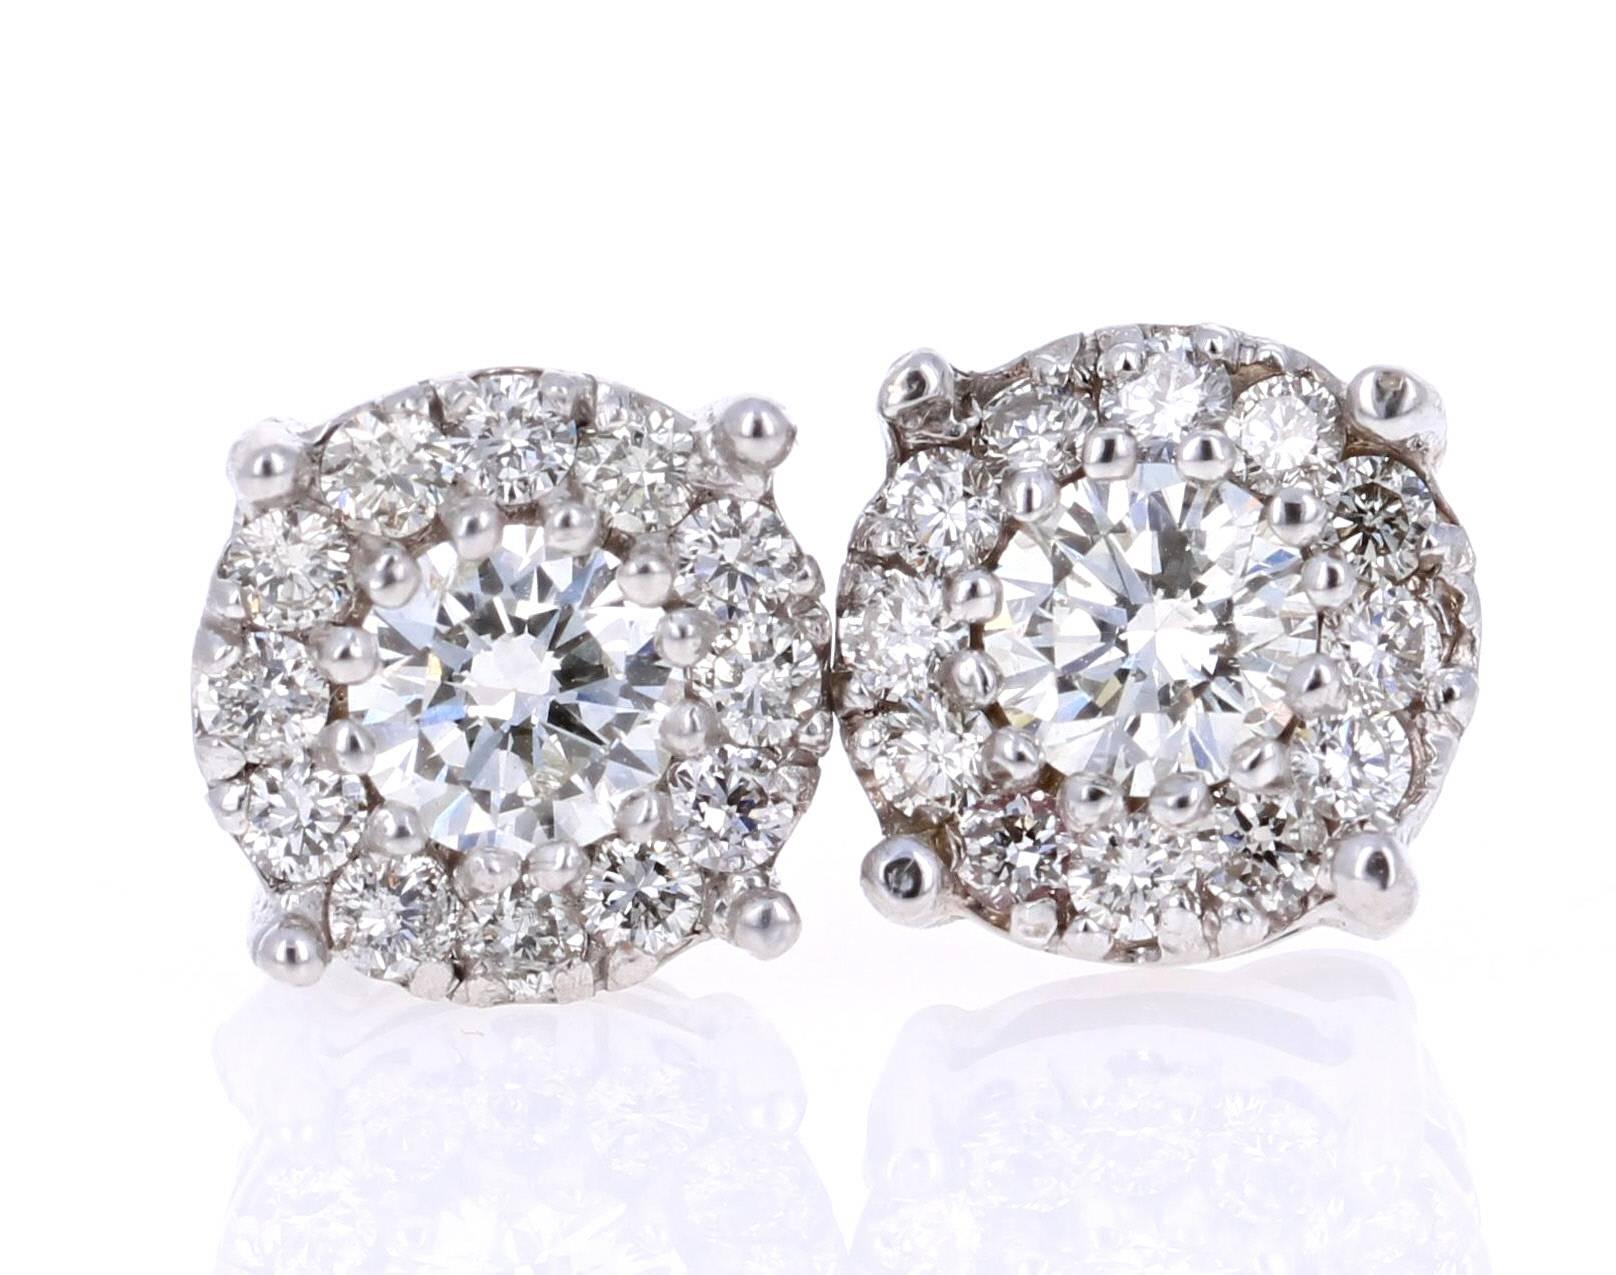 
1.36 Carat Round Diamond Floret Design 14K White Gold Stud Earrings!

This classic design of diamond earrings has 2 Round Cut Diamonds set in the center of the earrings that weigh 0.64 carats and there also 24 small Round Cut Diamonds that weigh